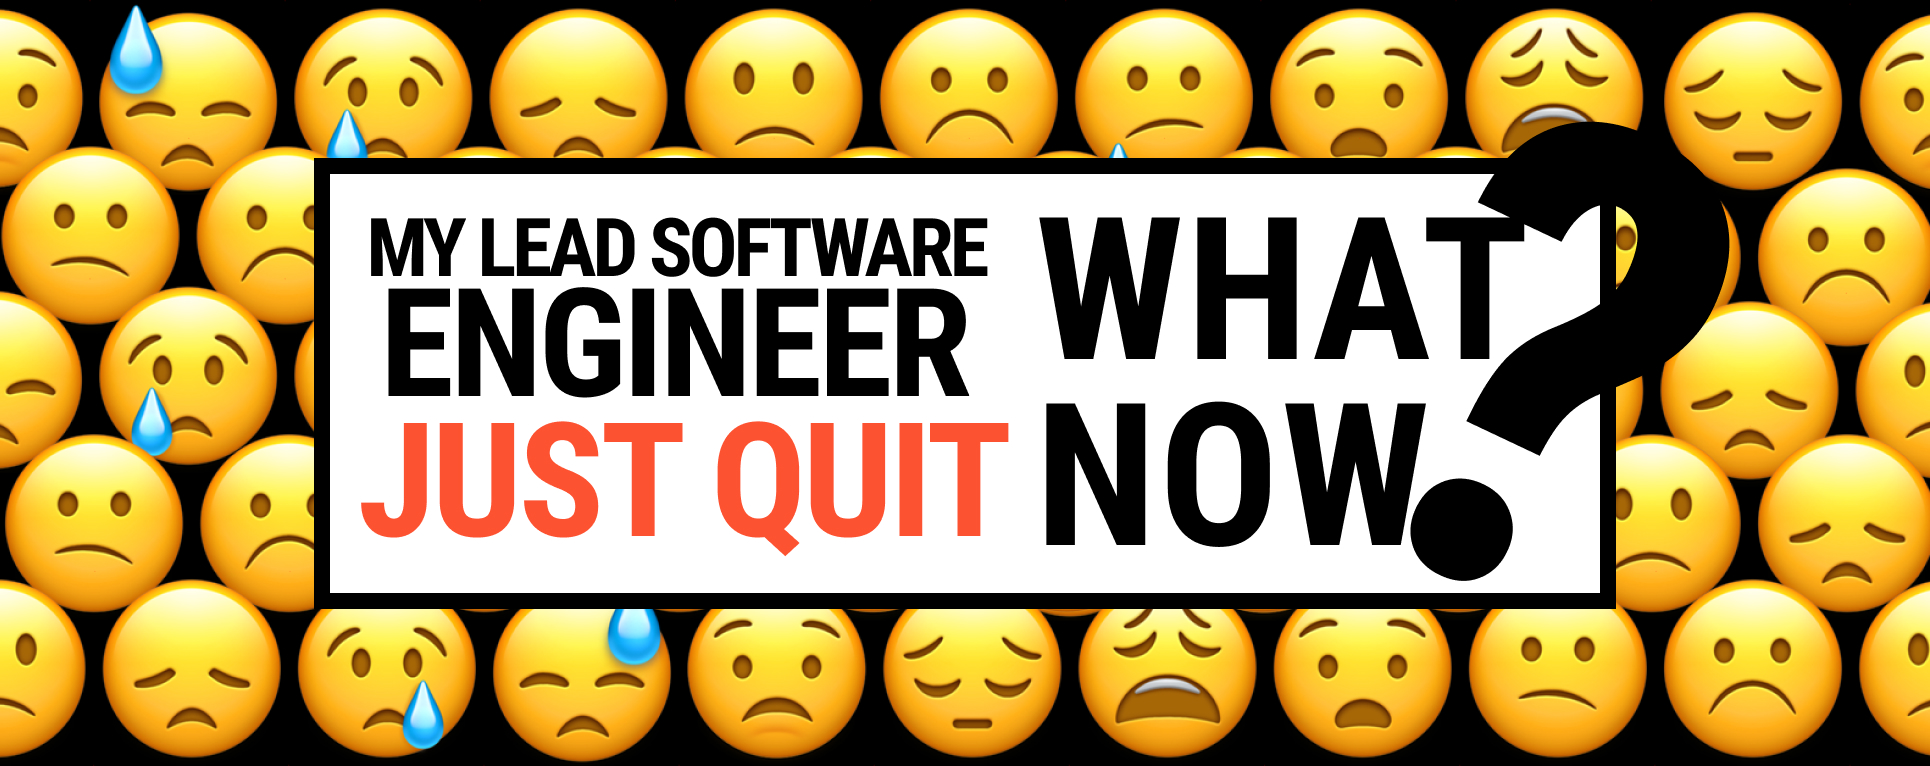 My Lead Software Engineer Just Quit. What Now?